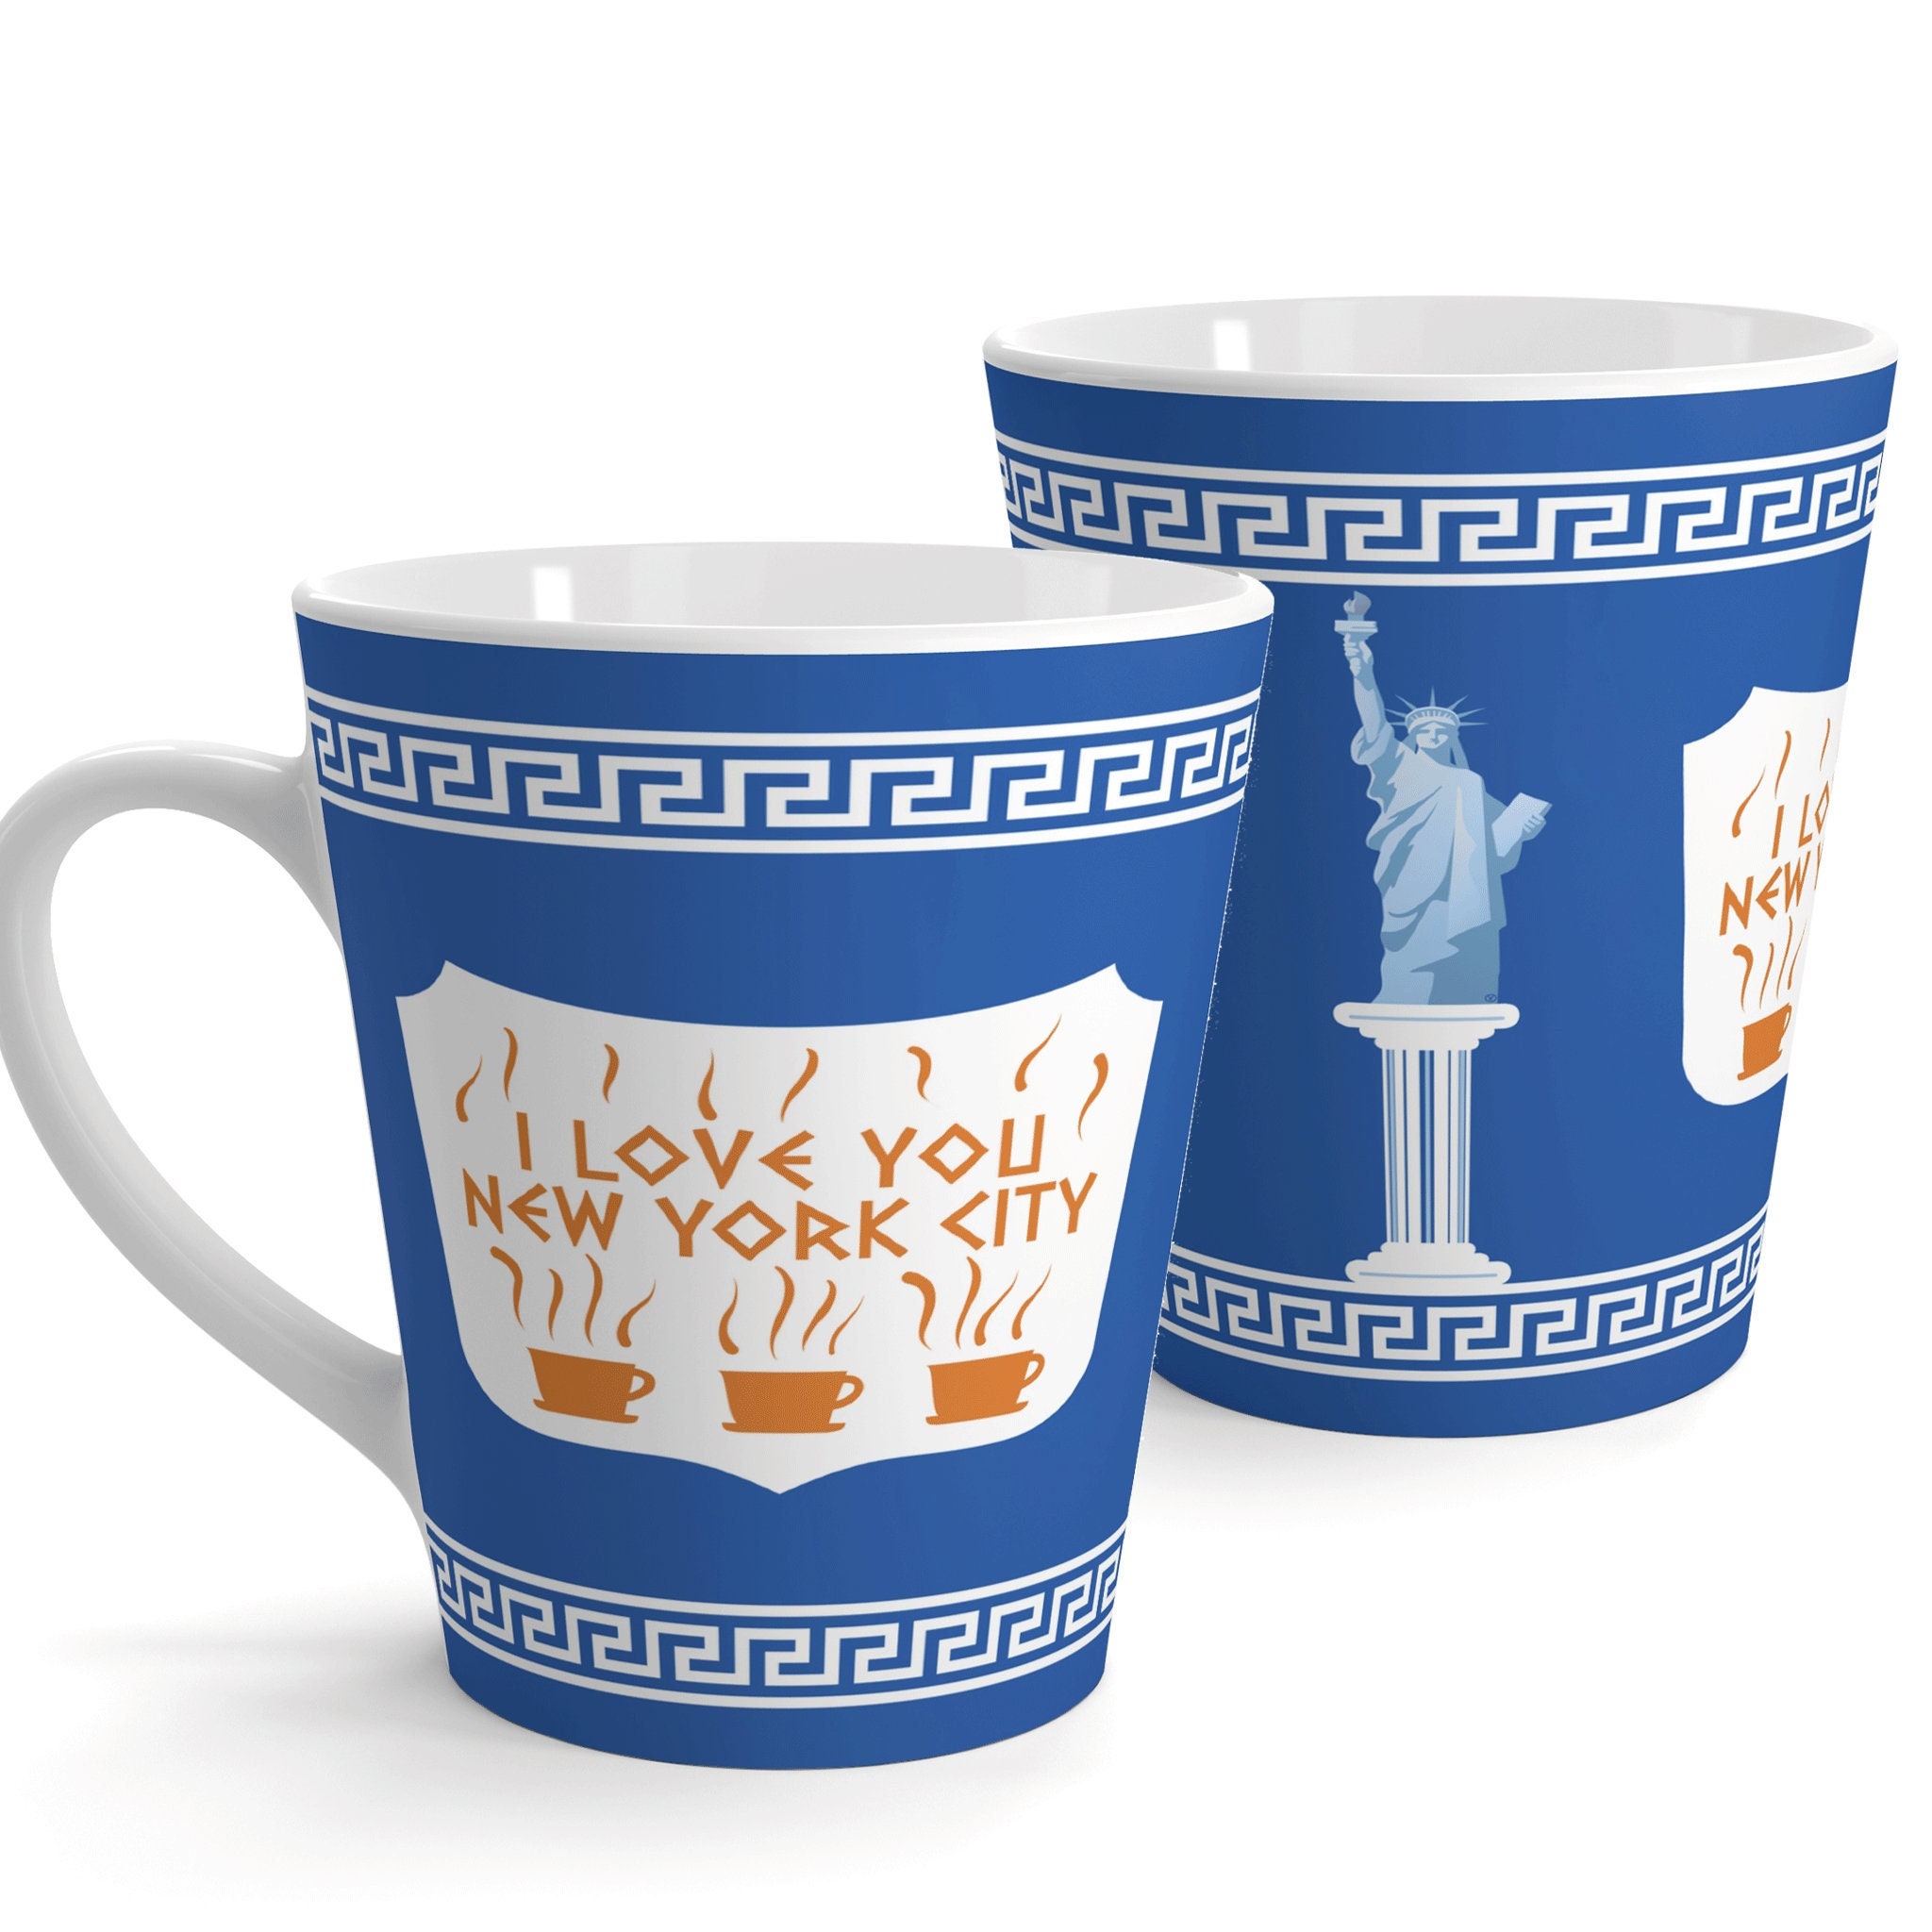 We Are Happy To Serve You Ceramic Cup 8oz Greek Motifs by Sweetheart Cup  Company